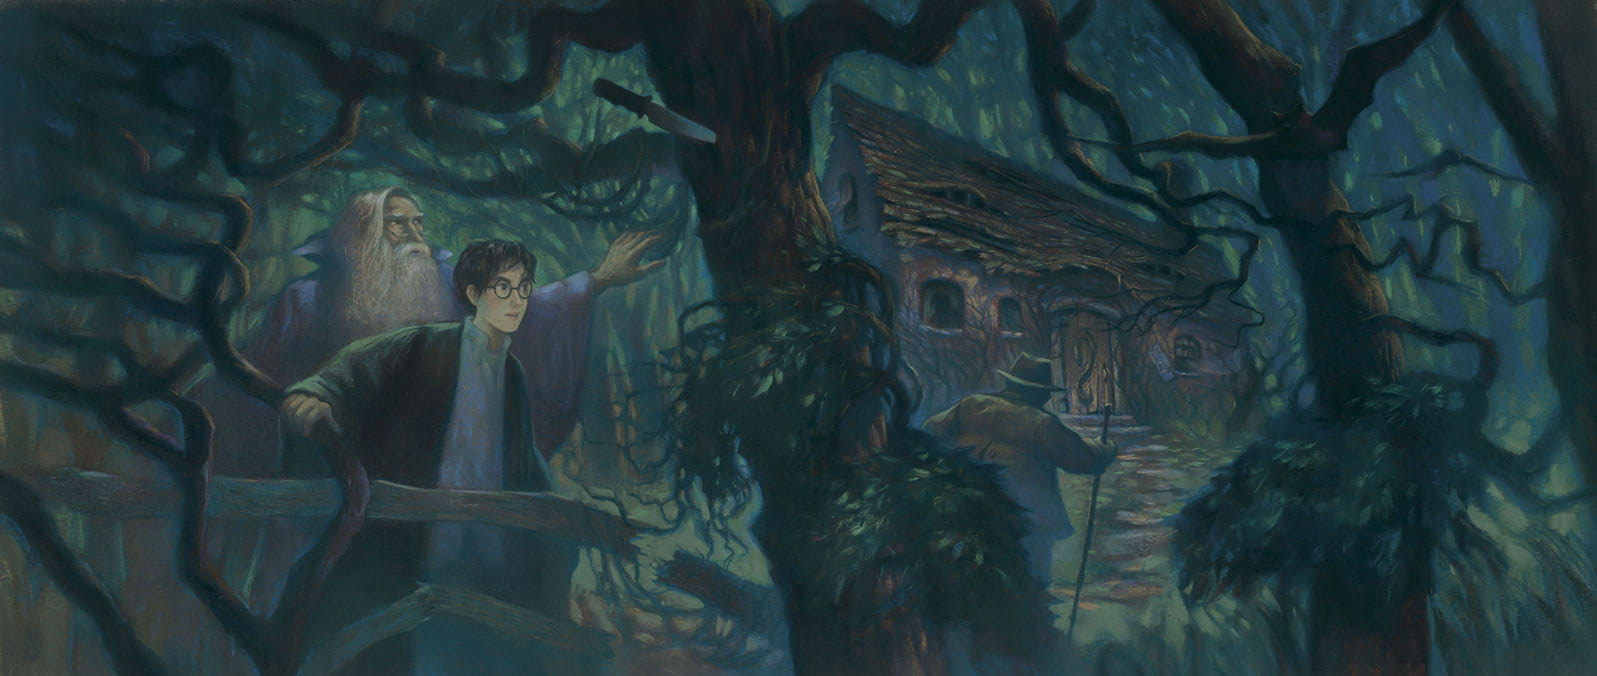 ‘Half-Blood Prince’ deluxe edition full jacket artwork